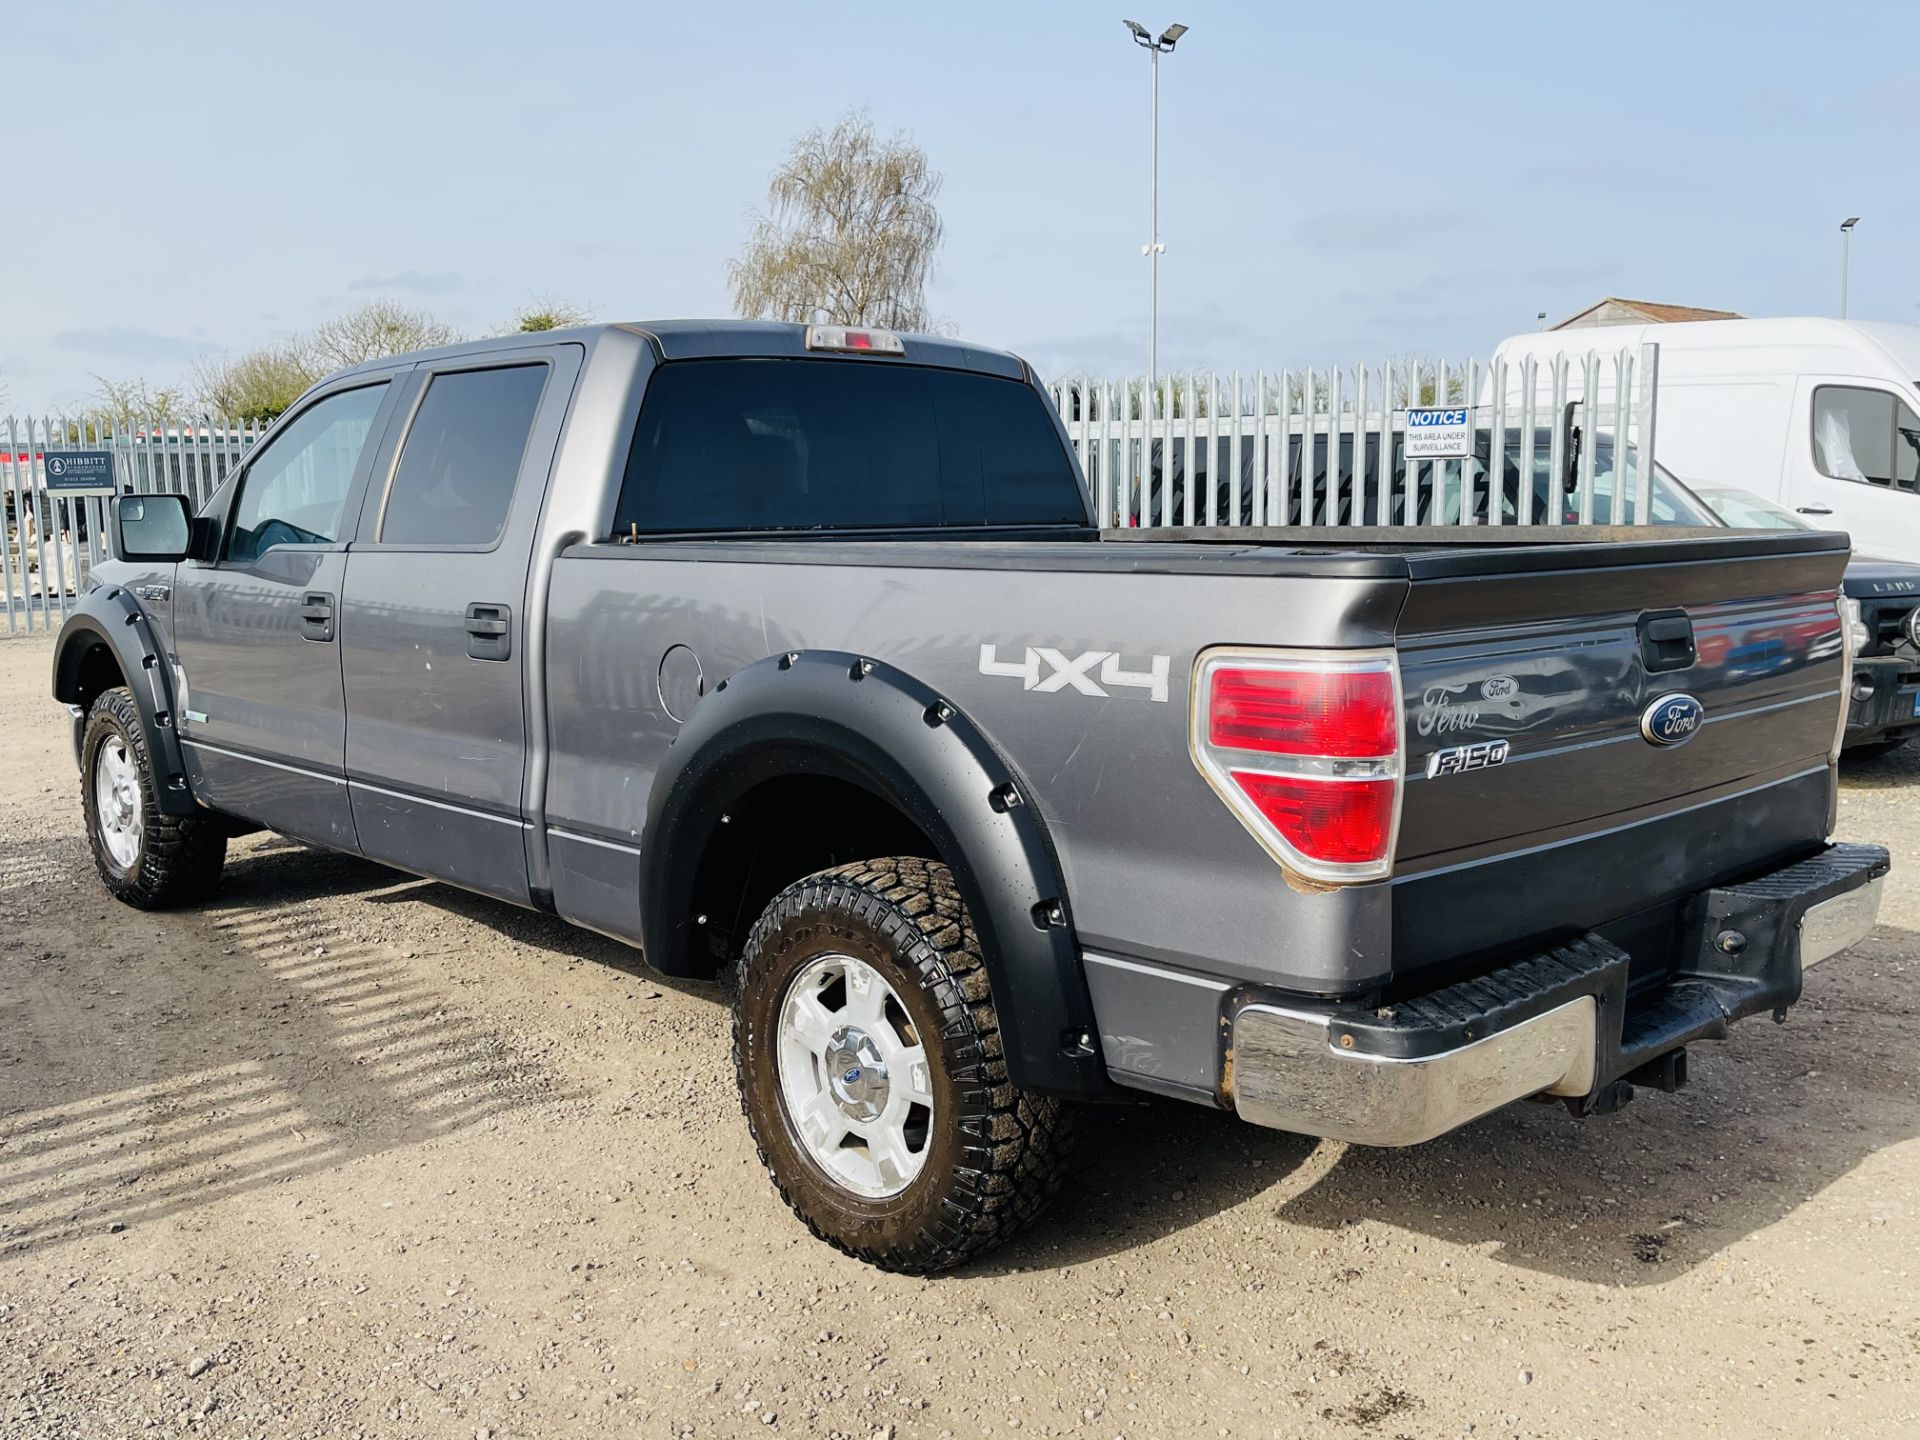 Ford F-150 XLT 3.5L V6 Ecoboost 'Super-Crew' 4WD - '2012 Year' Air con** NO VAT SAVE 20%** - Image 7 of 28